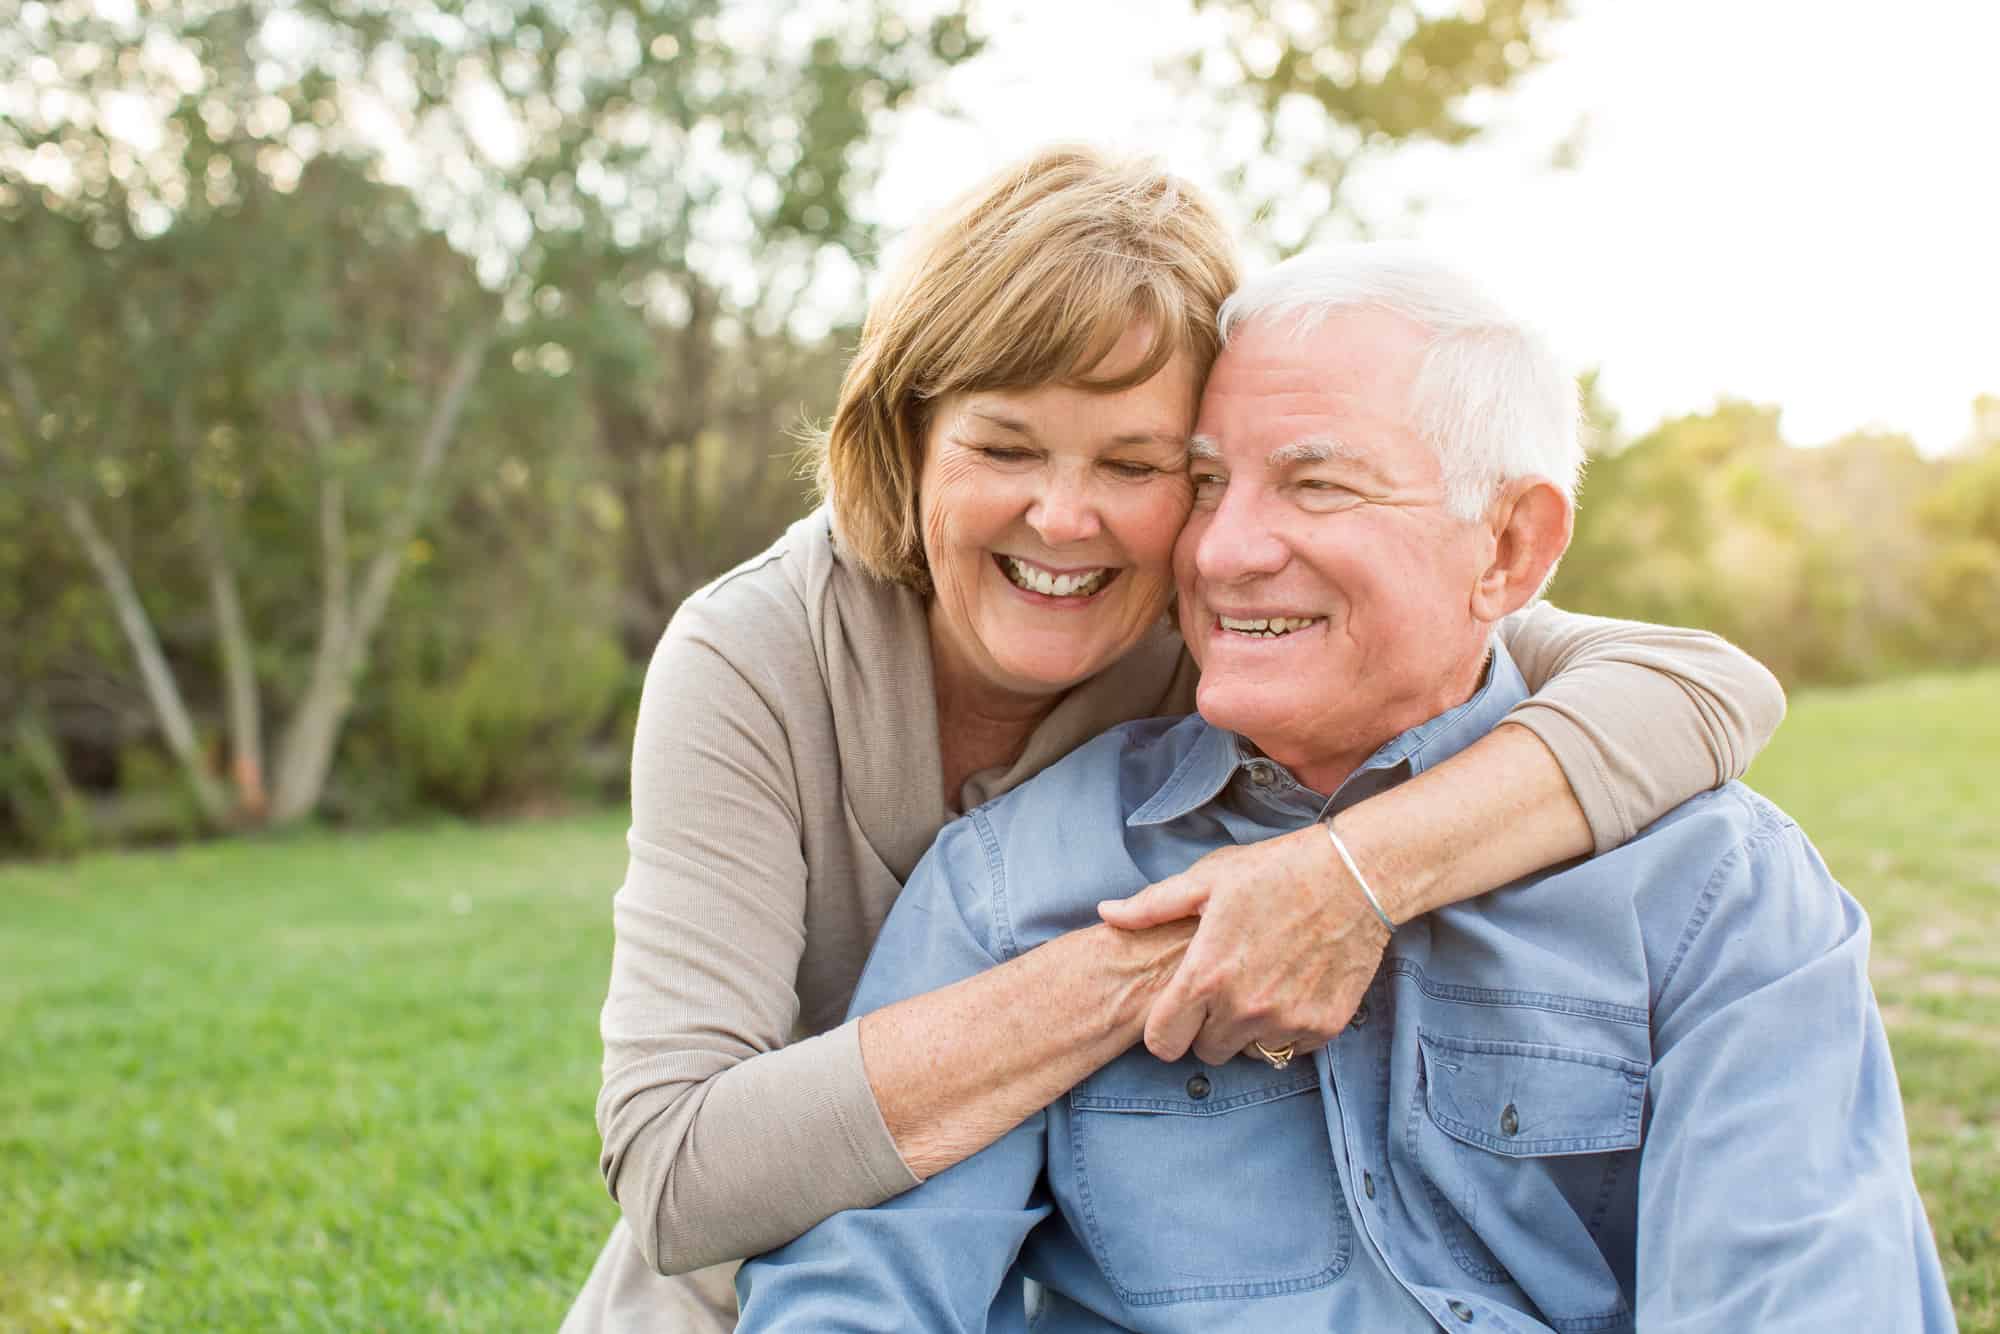 ACGrace - An elderly couple embracing and smiling outdoors.